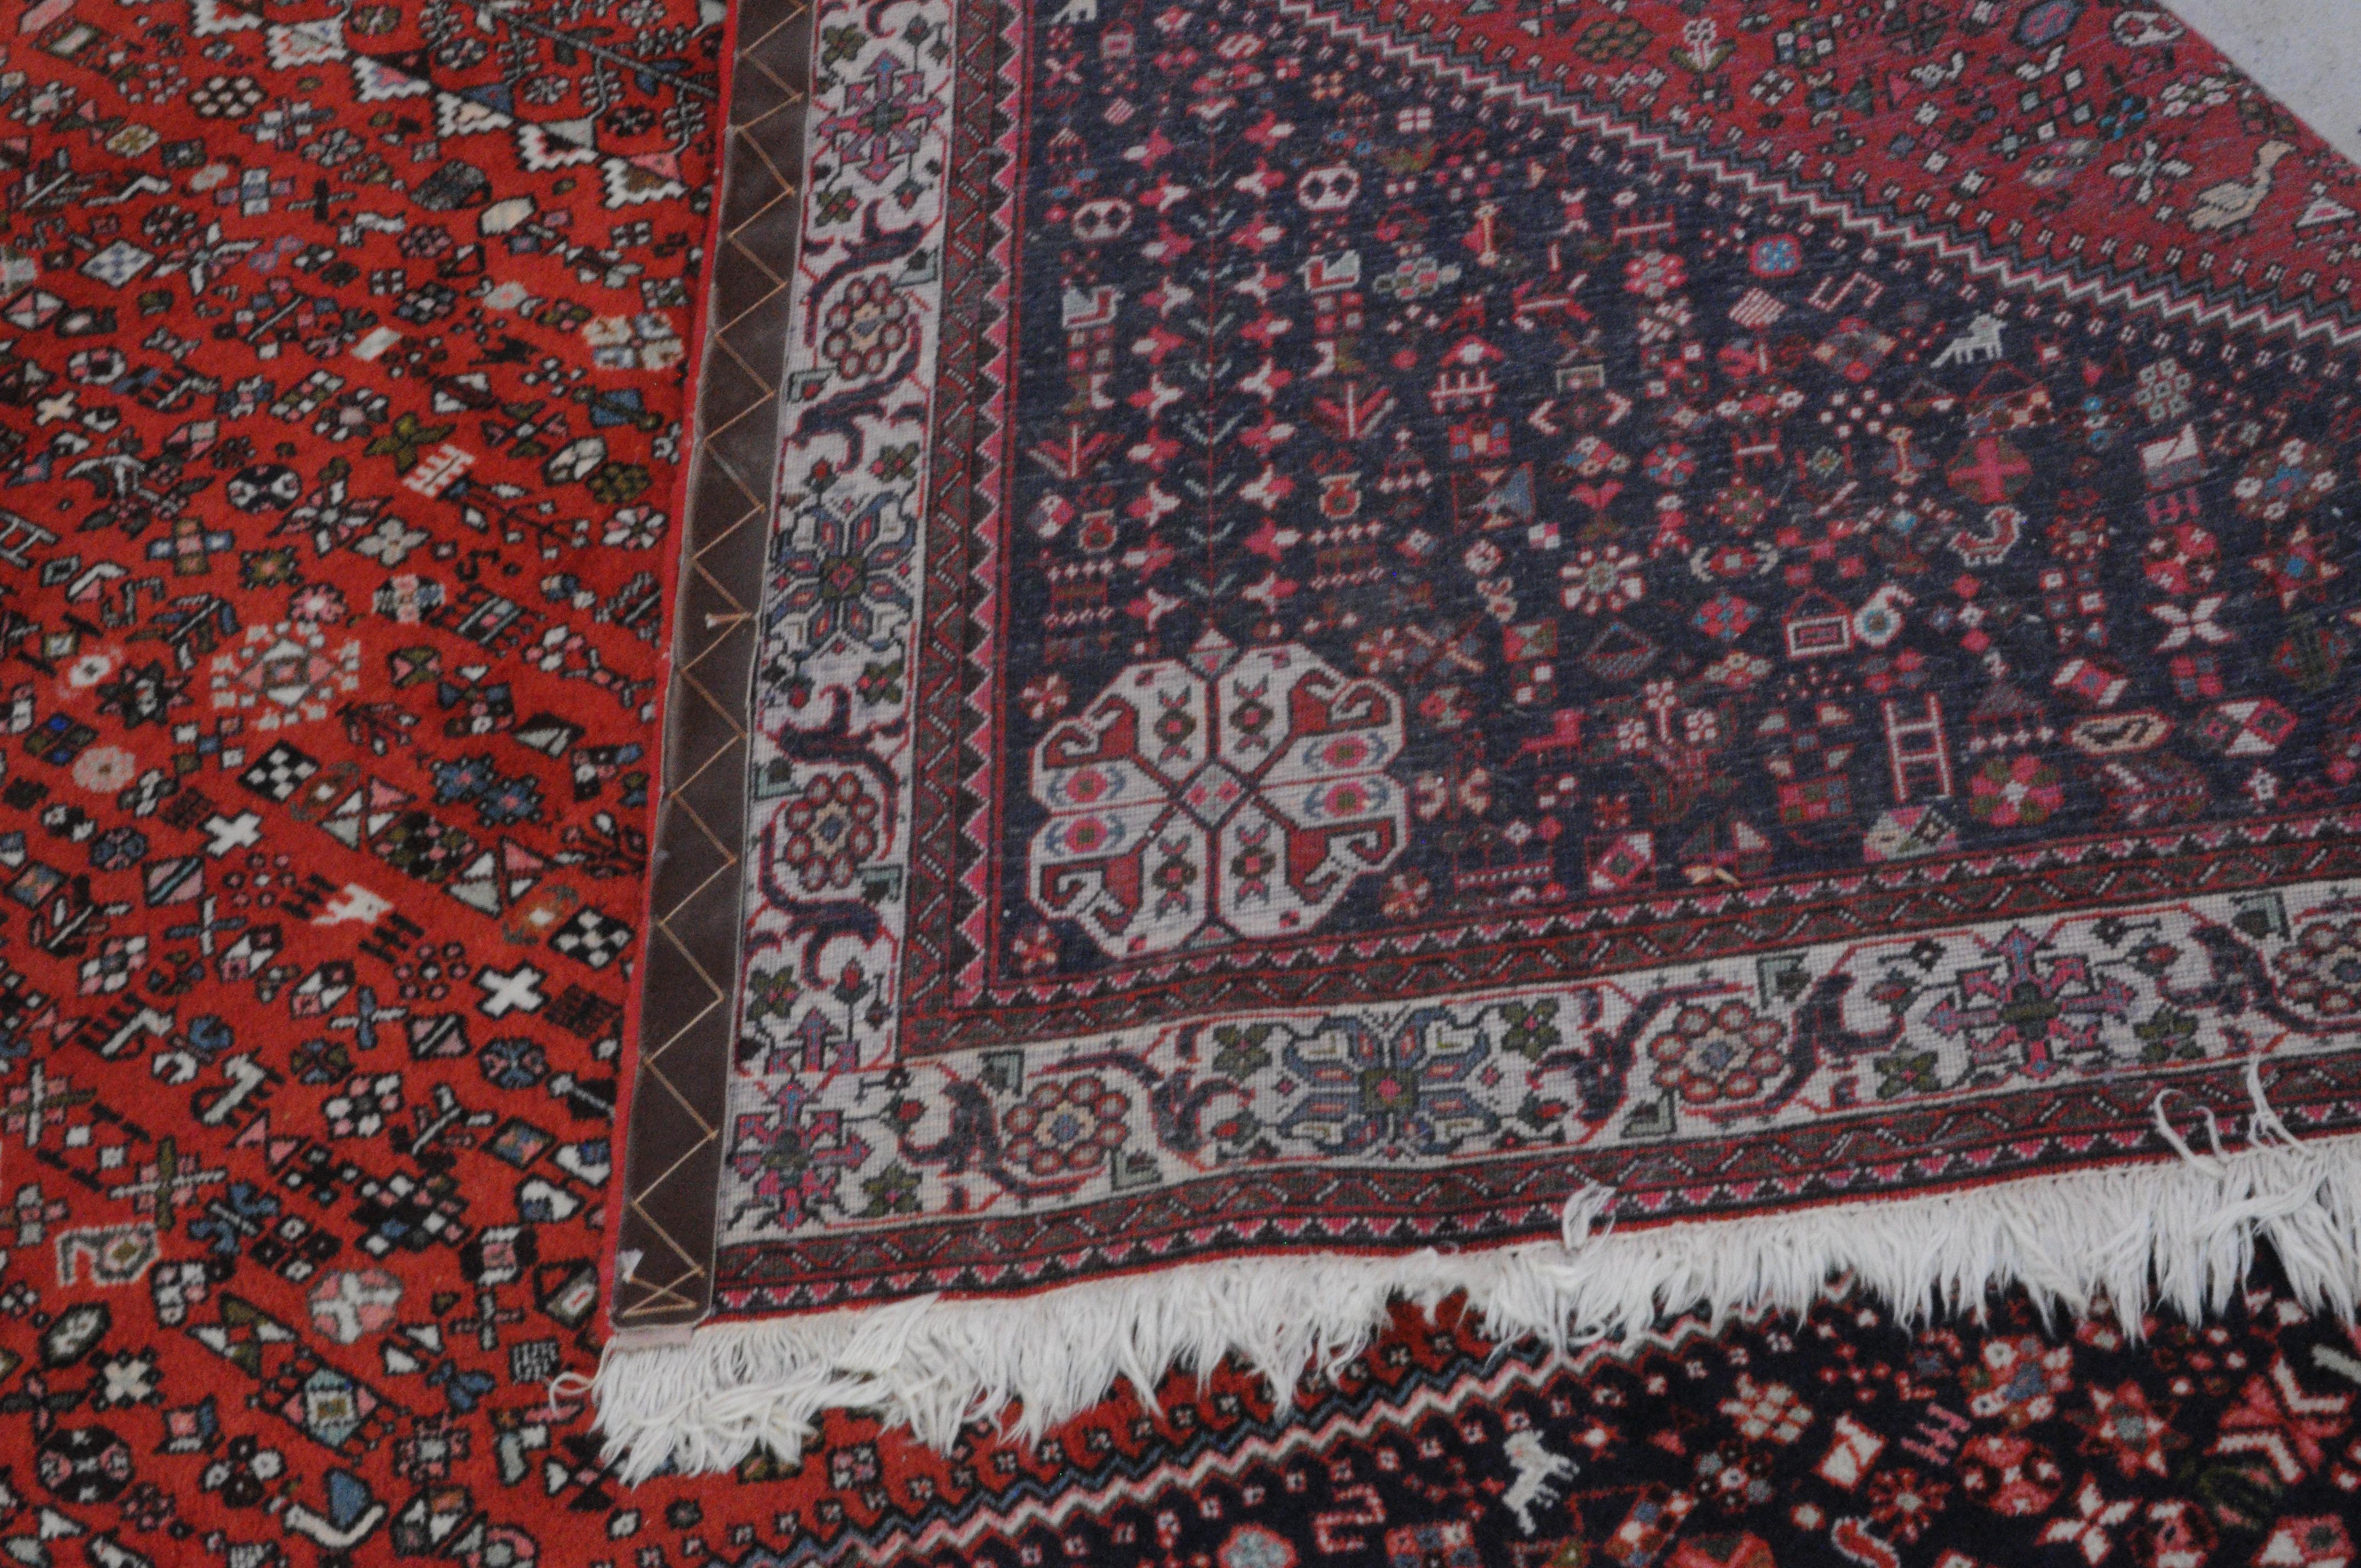 Geometric Shiraz tapestry / rug in attractive palette of red and navy with various accent colors, circa mid-20th century. Combination of geometric shapes and animal motifs present throughout. 
Very clean, vintage condition. 
Measures: 80